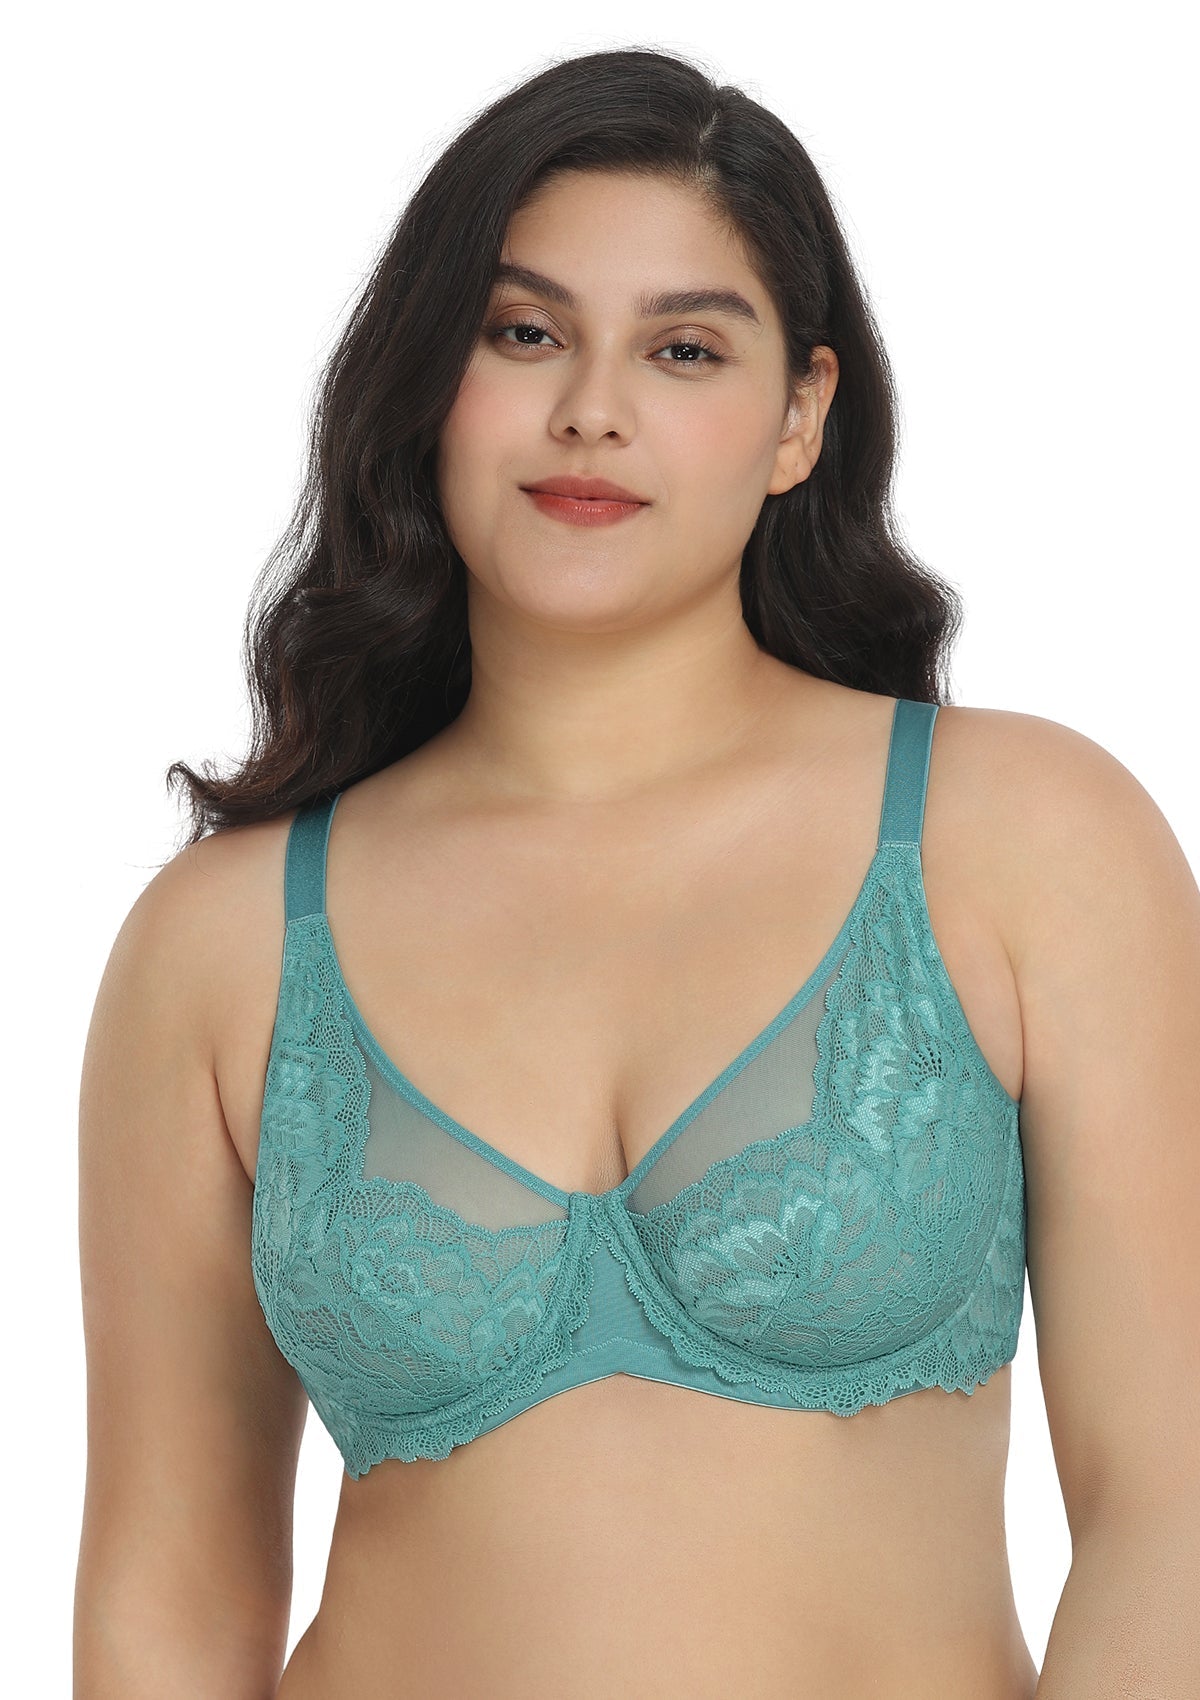 HSIA Paeonia Lace Full Coverage Underwire Non-Padded Uplifting Bra - Purple / 36 / C